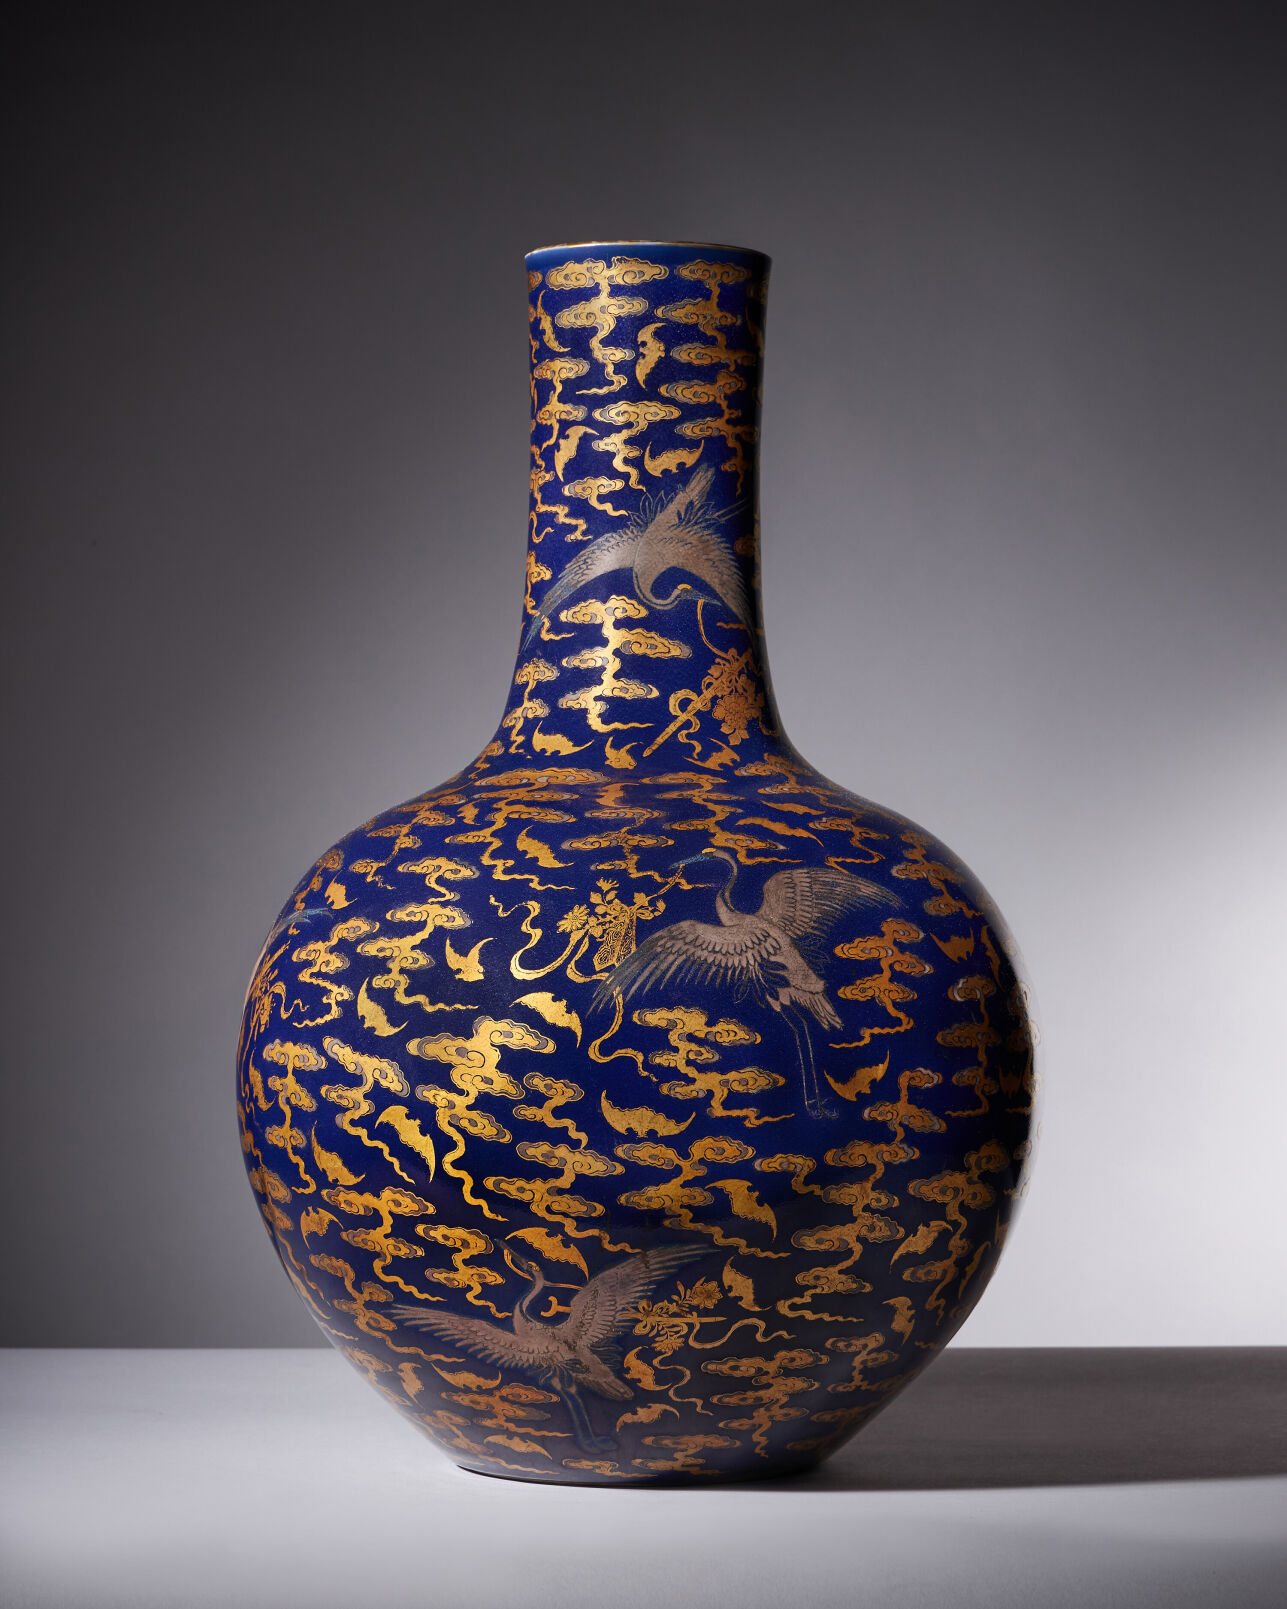 Rare 18th-century Chinese vase kept in kitchen sells for $1.8 